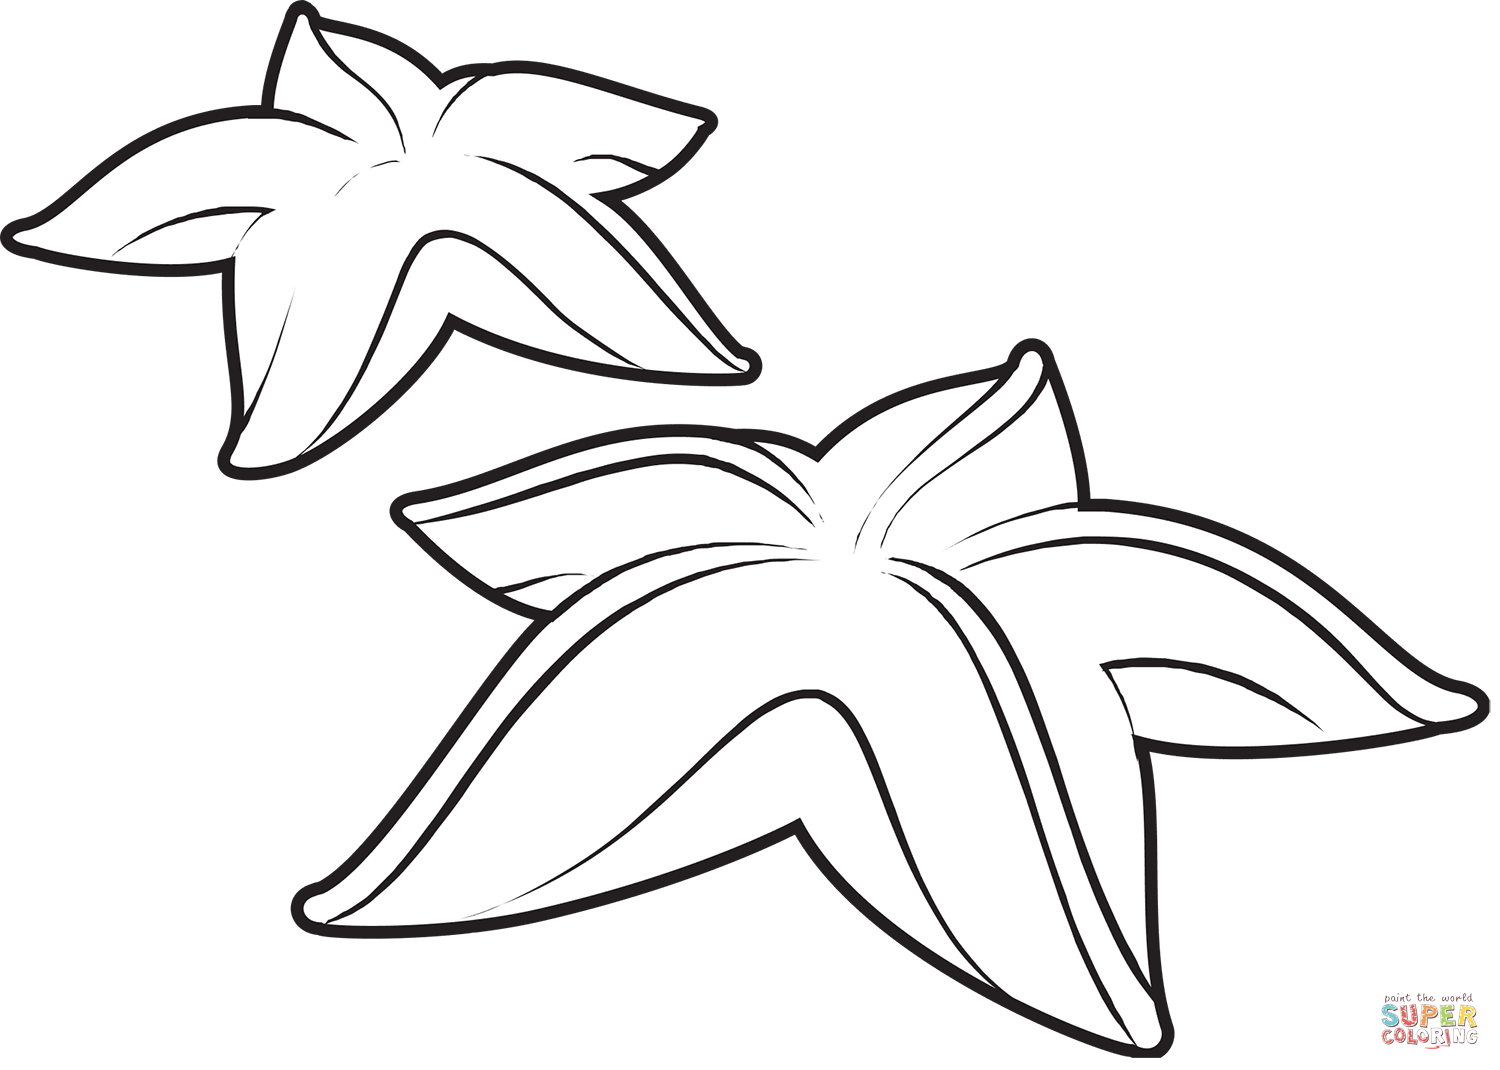 Starfish coloring page | Free Printable Coloring Pages